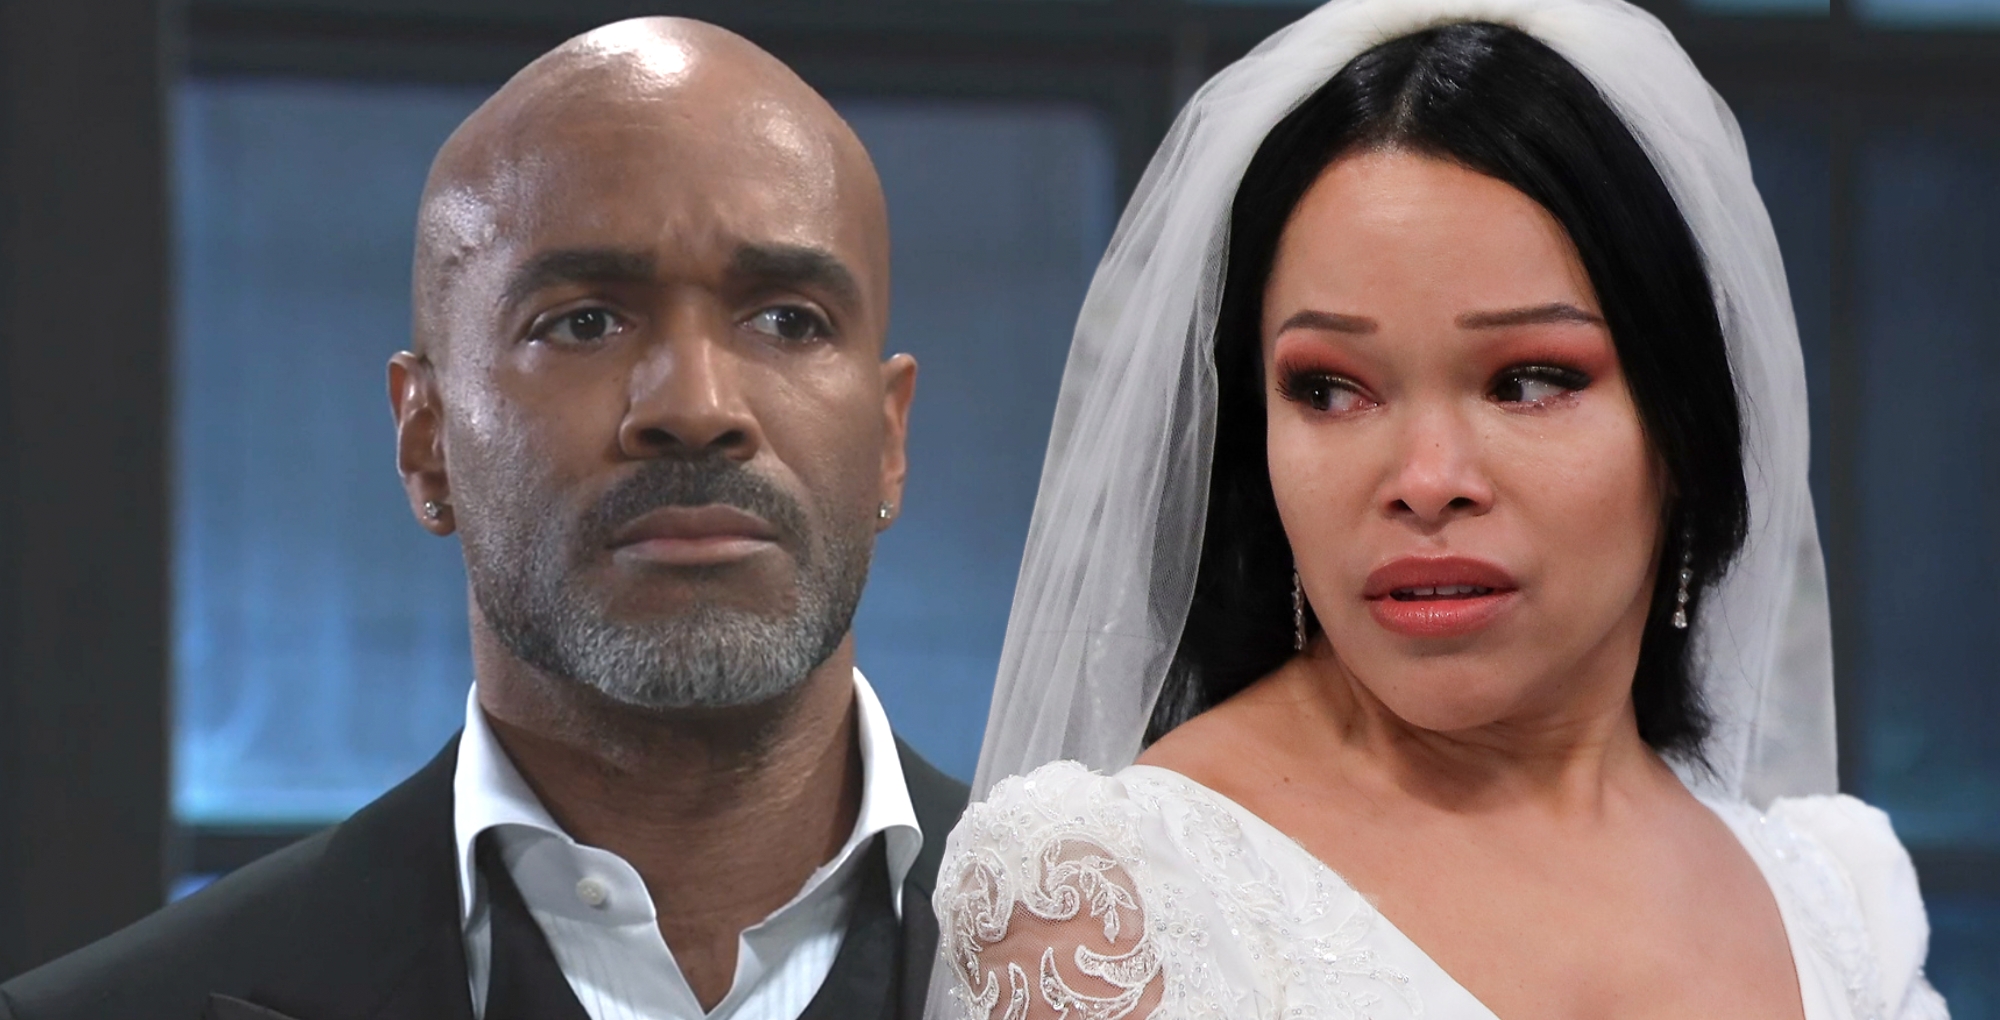 gh spoilers speculation curtis ashford and portia robinson in wedding attire and upset